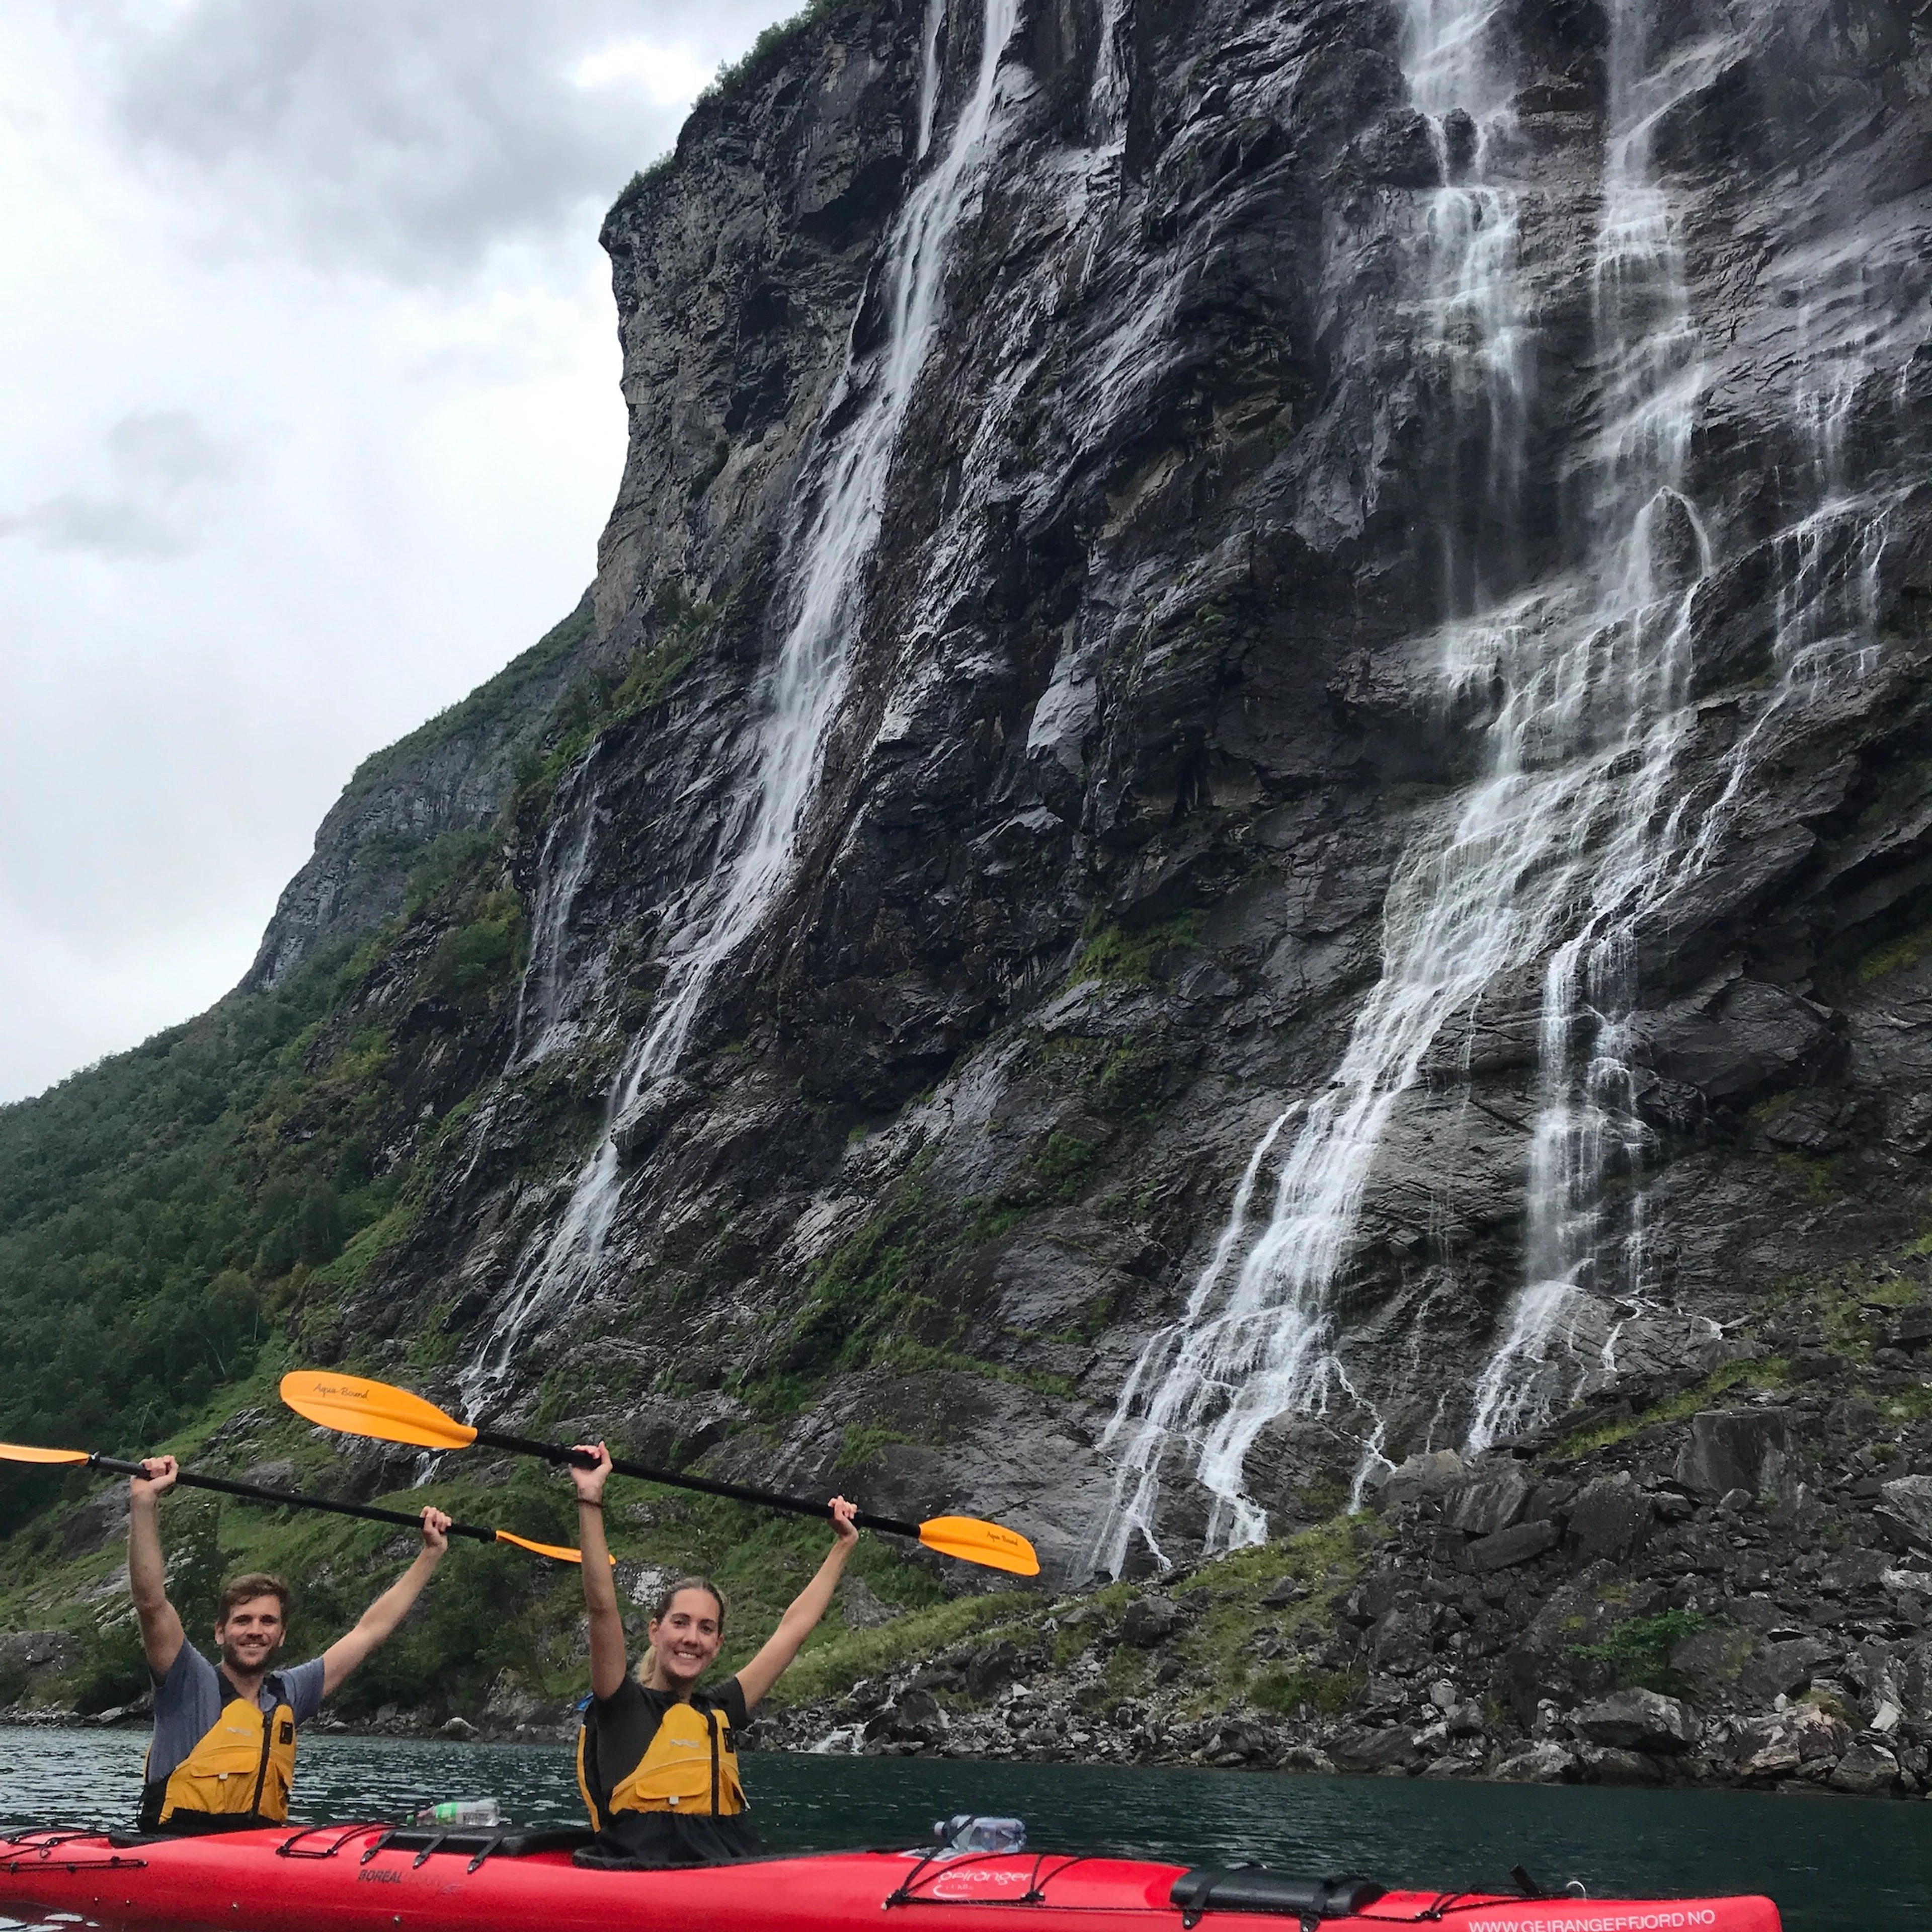 Guided kayak tour to the "Seven sisters" from Geiranger, Geirangerfjord, Norway